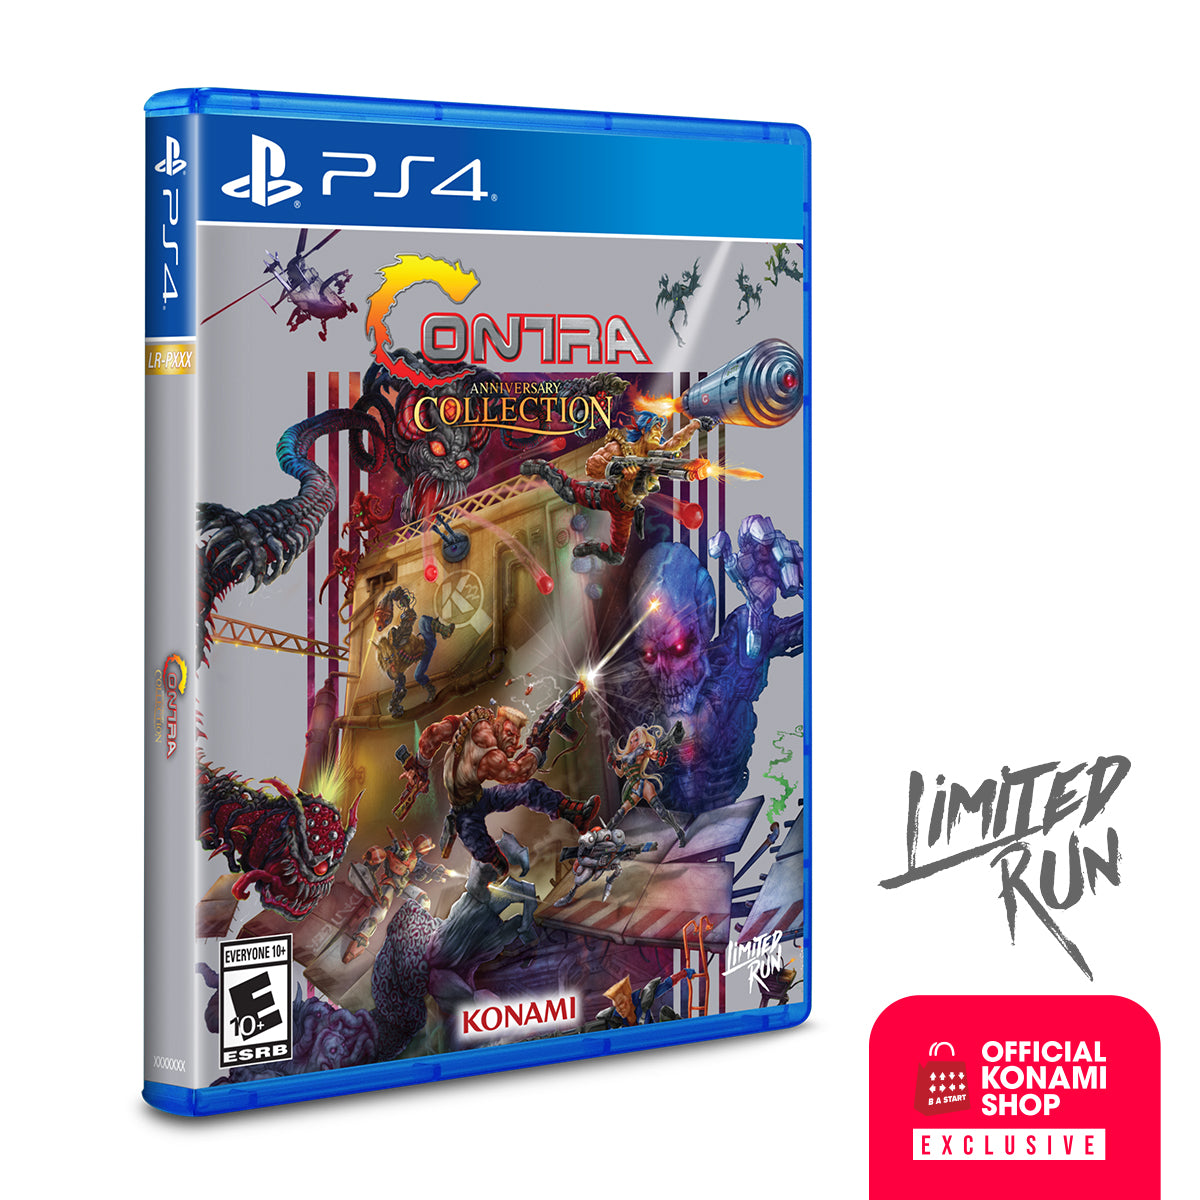 Riders Republic Limited Edition - Sony PlayStation 4 for sale online